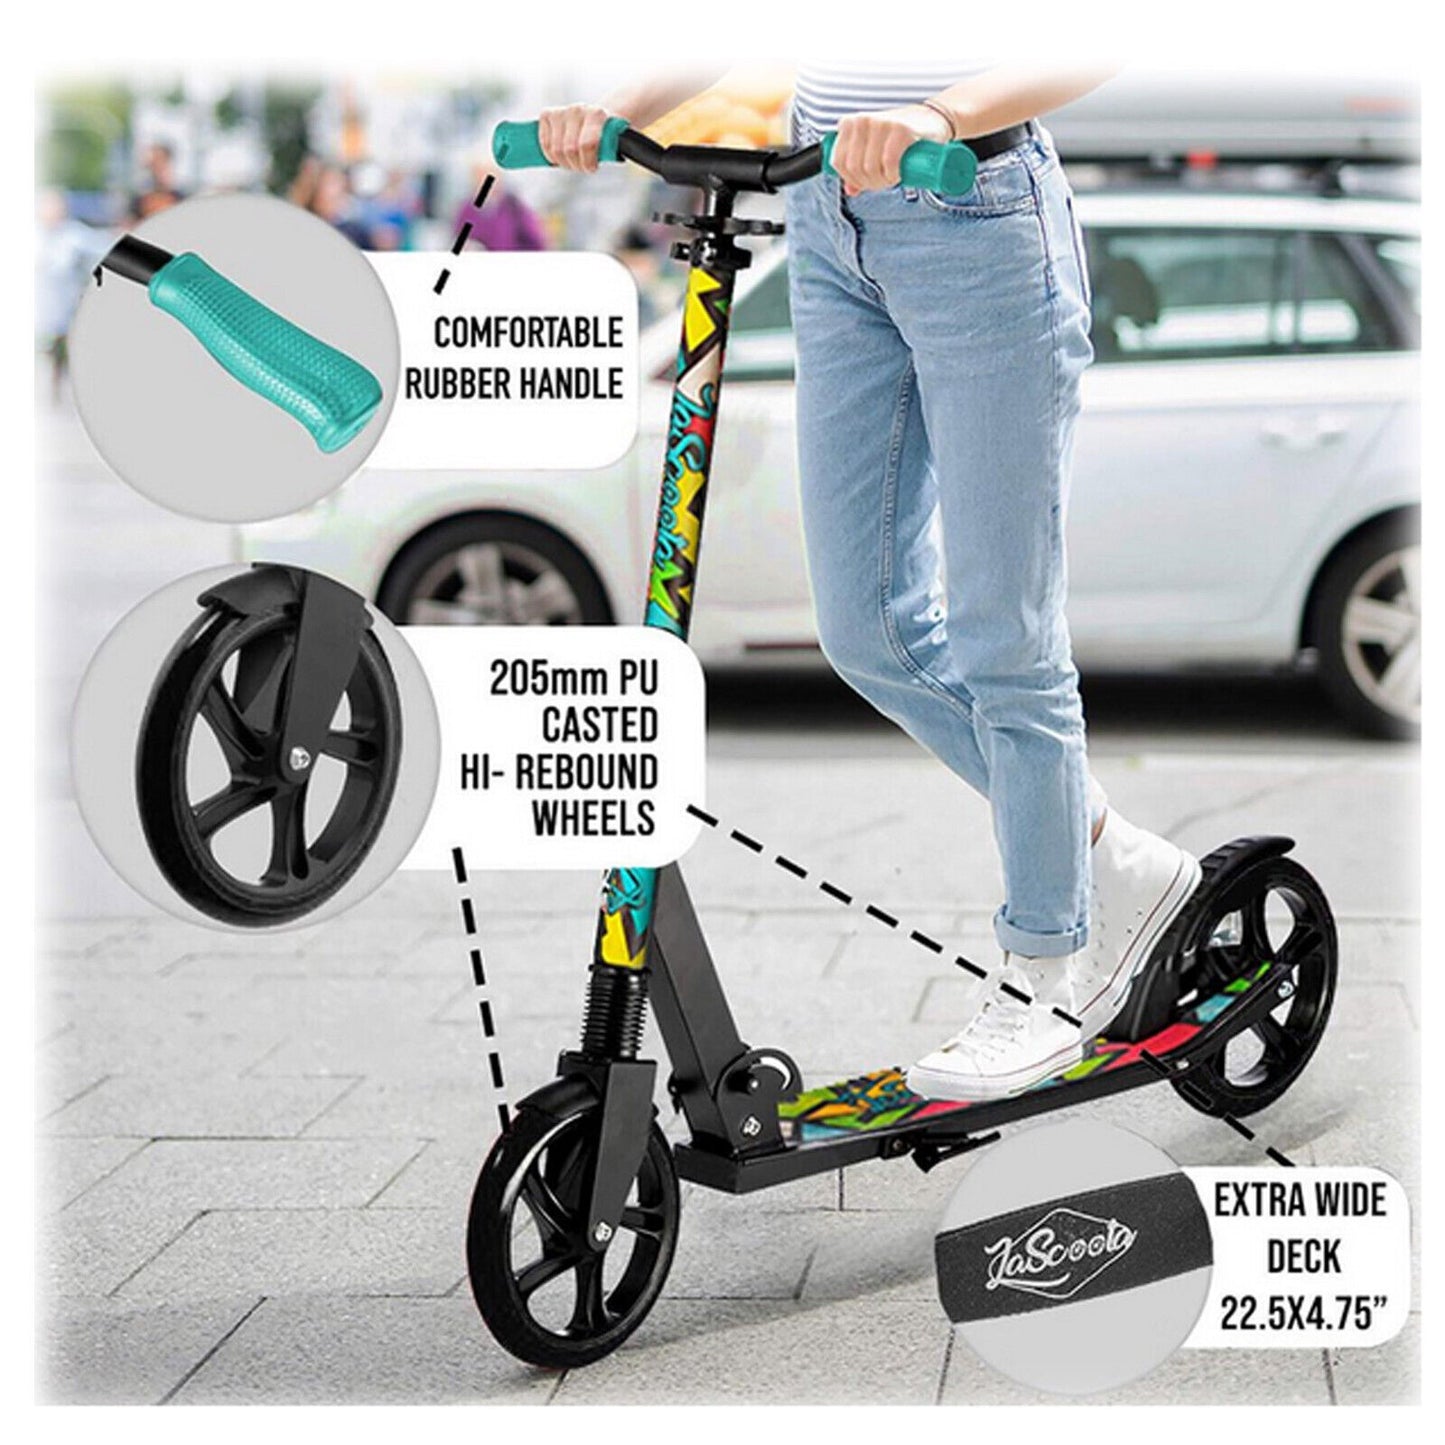 Urban Glide Kick Scooter: Sleek Graphic Black Design for Teens and Adults